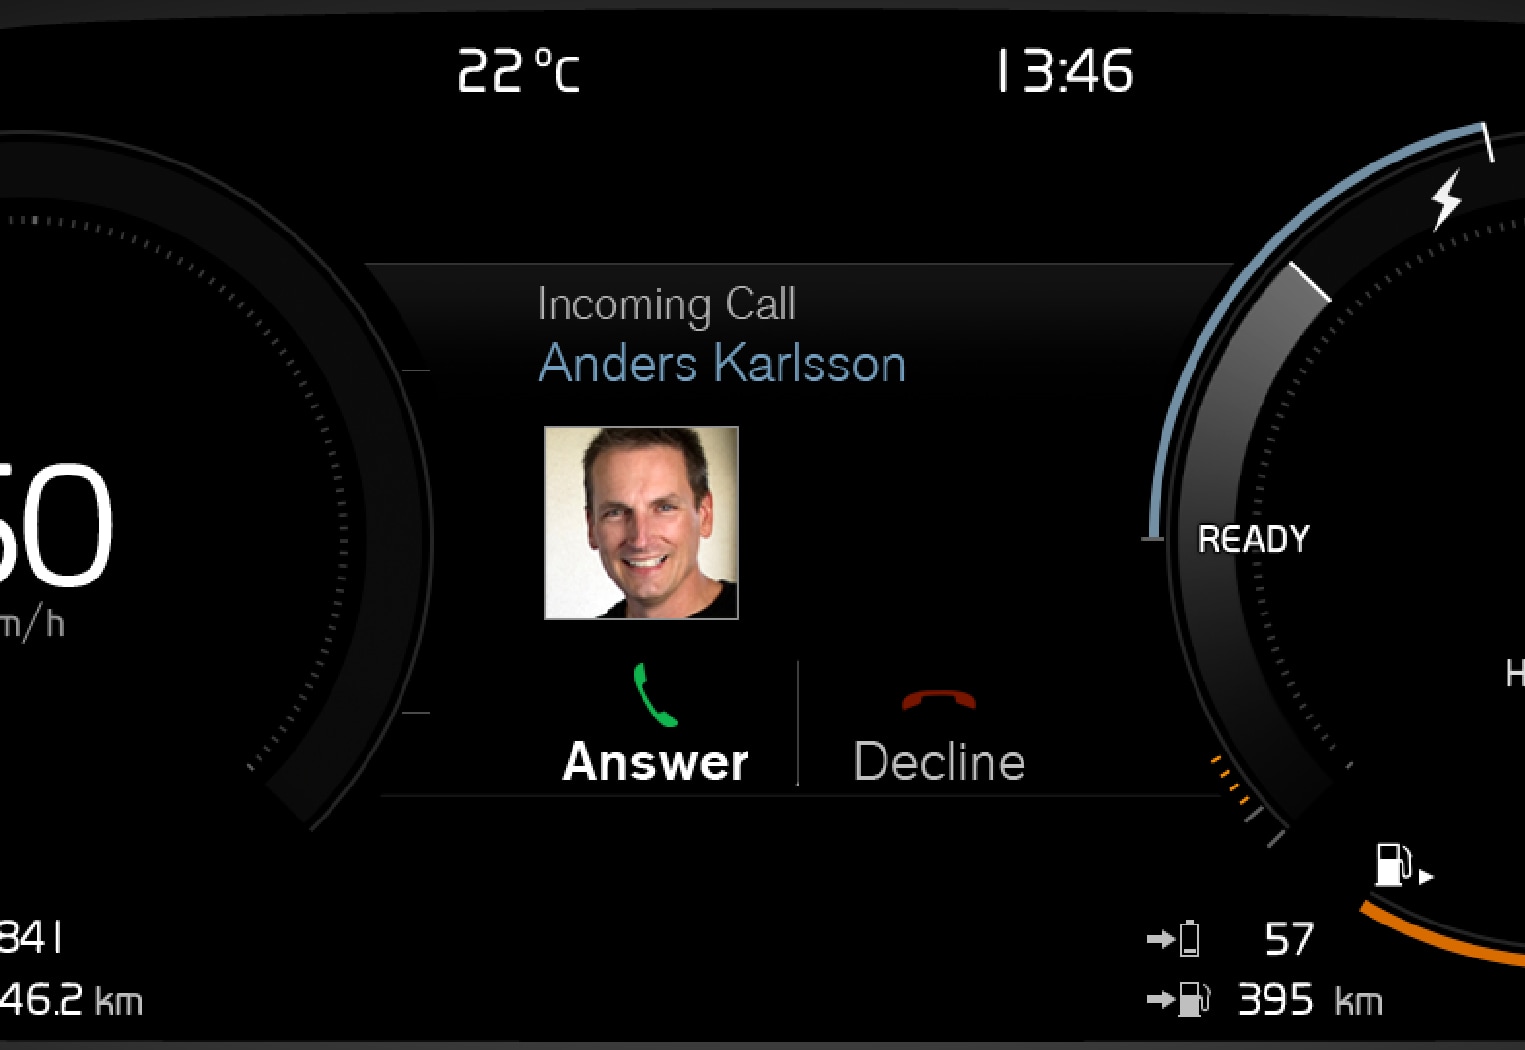 PS-1926-Incoming call message in driver display